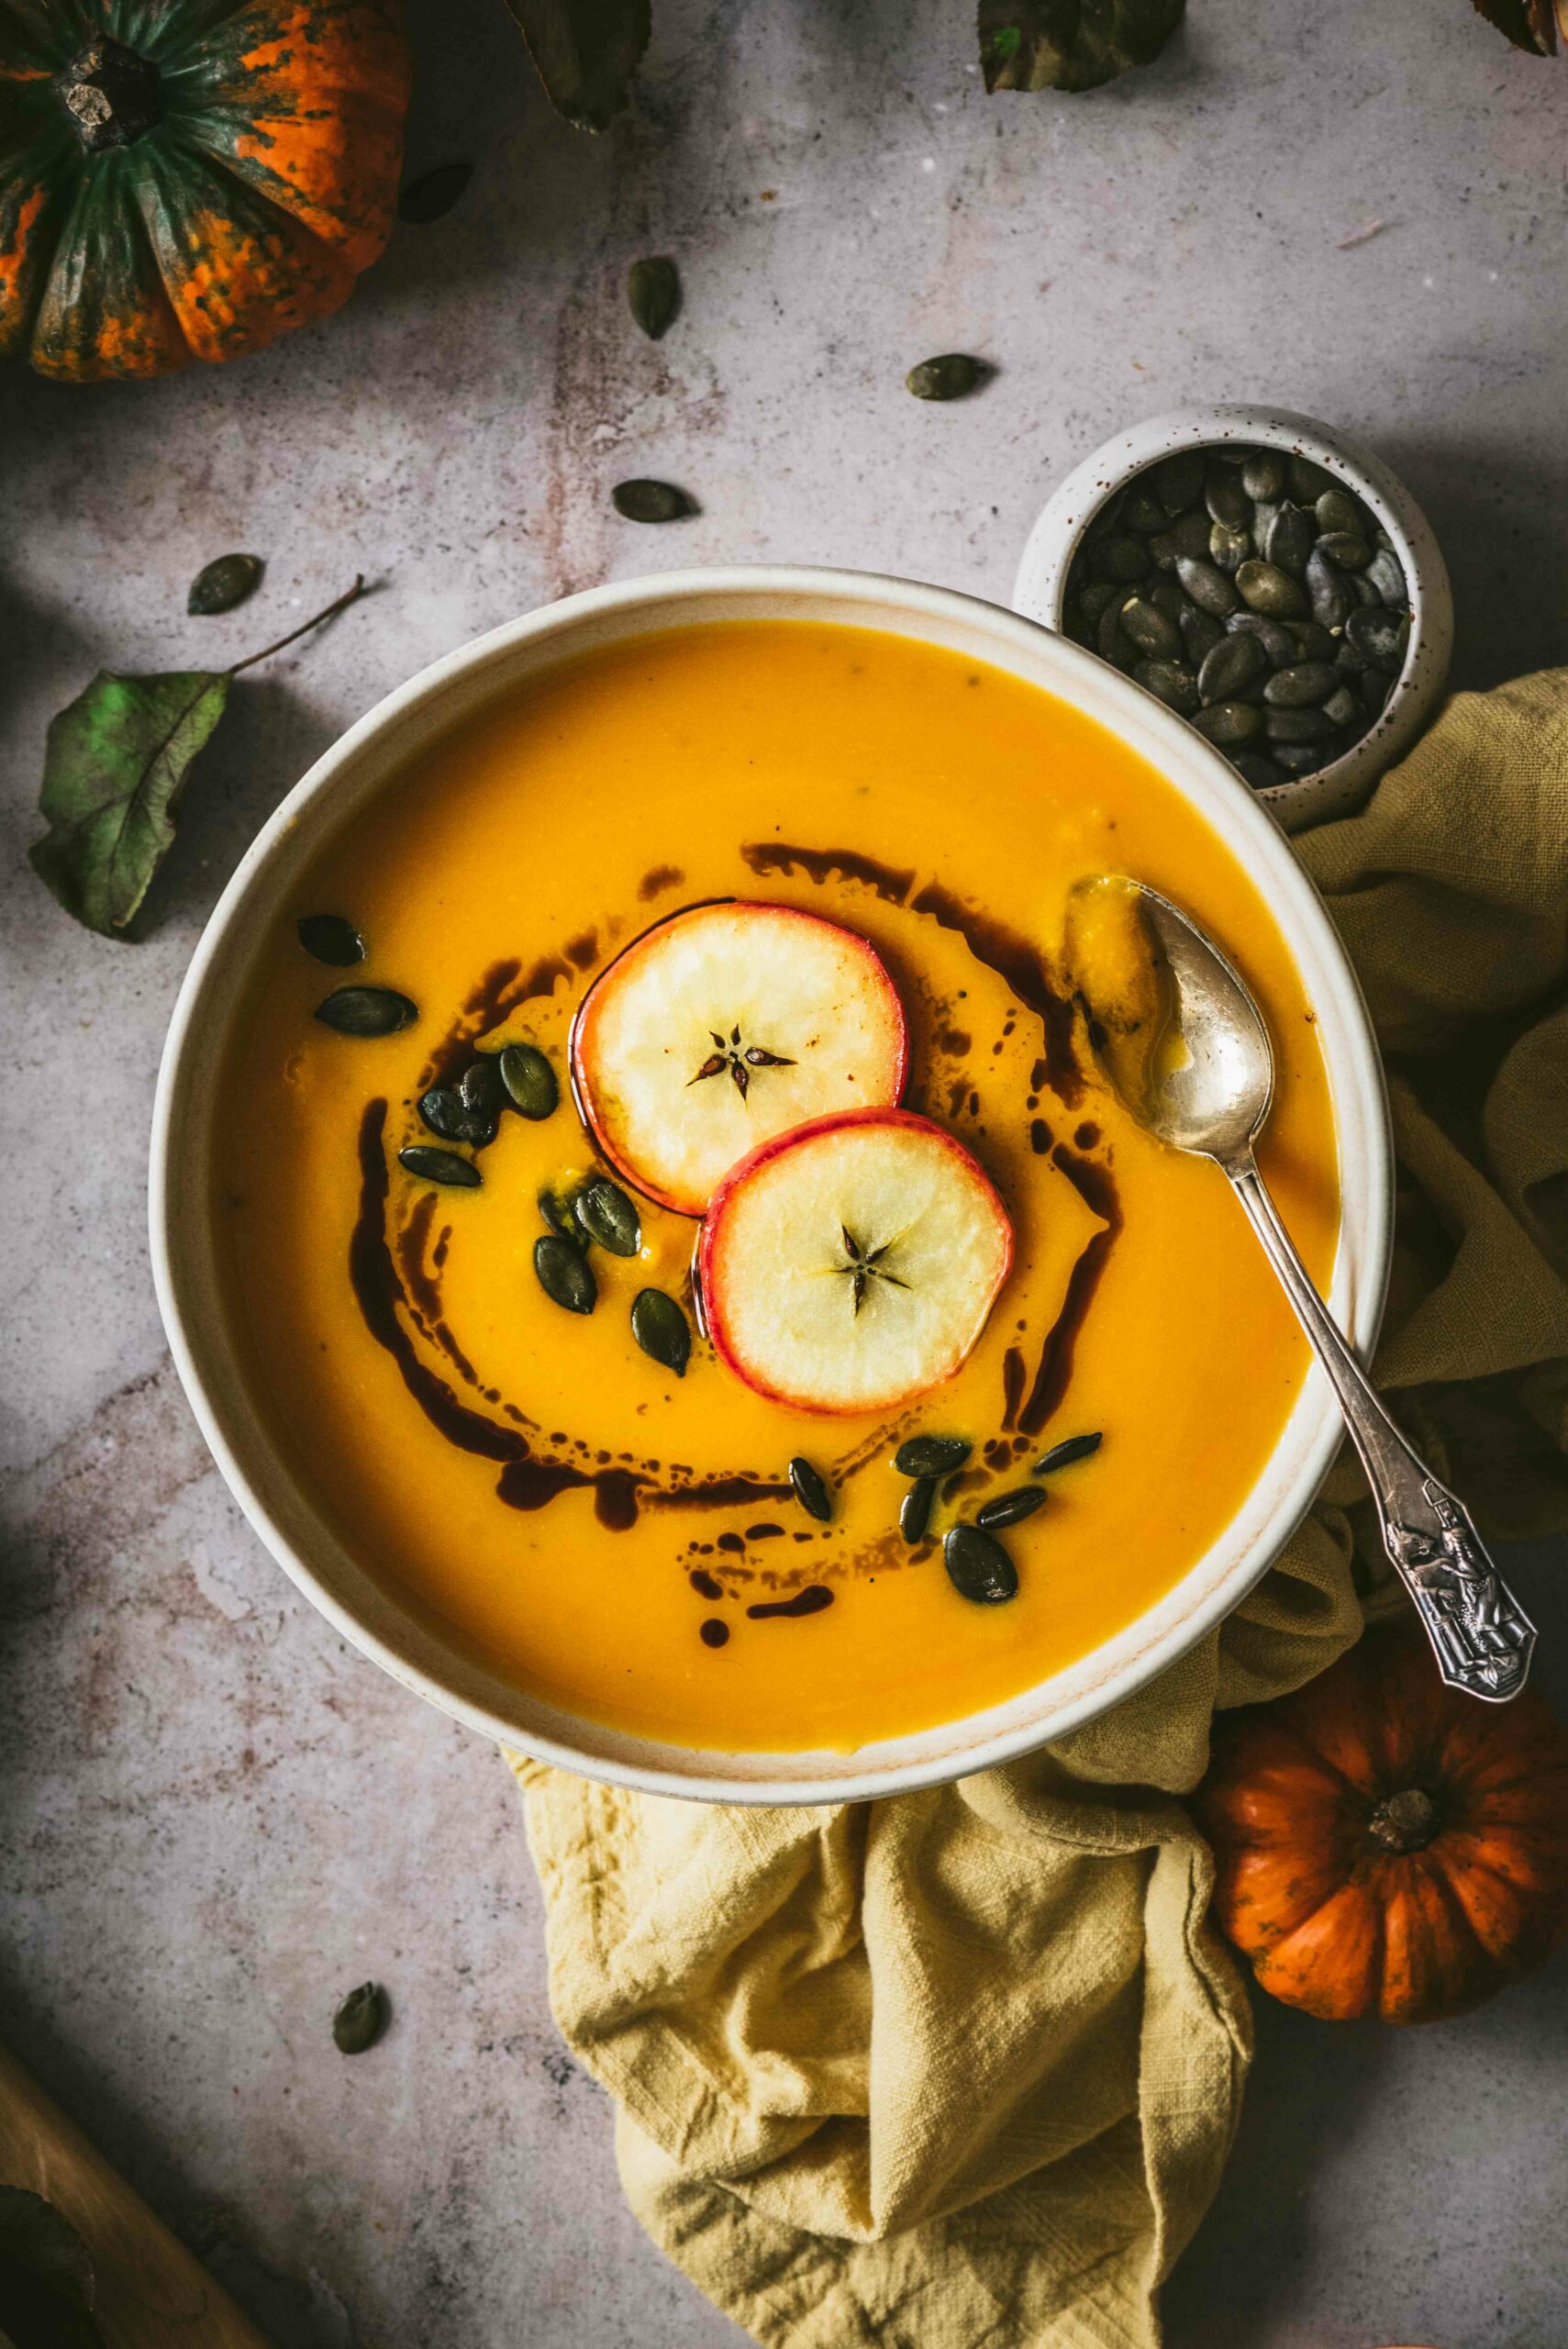 A bowl of creamy Apple Pumpkin Soup to brighten up the mood.